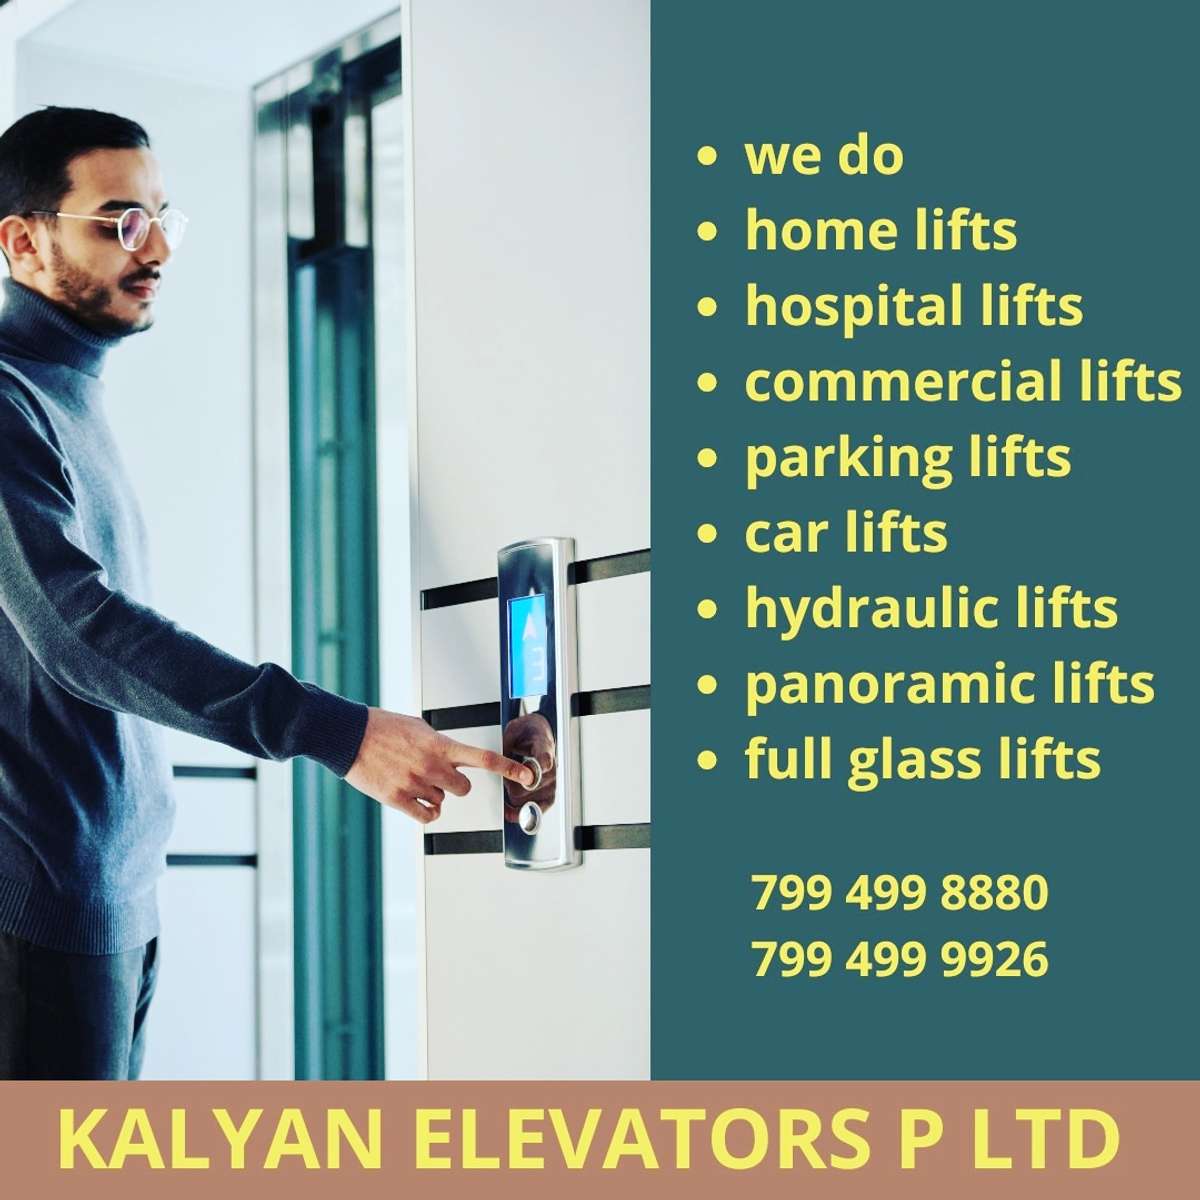 Kalyan Elevators offers the long-awaited solution to vertical mobility within homes at affordable prices and easy-to-use features. Our customized and aesthetically designed home lifts are easily installable in preexisting homes as well as houses under construction, and help you relieve the headache of climbing. More details:- 